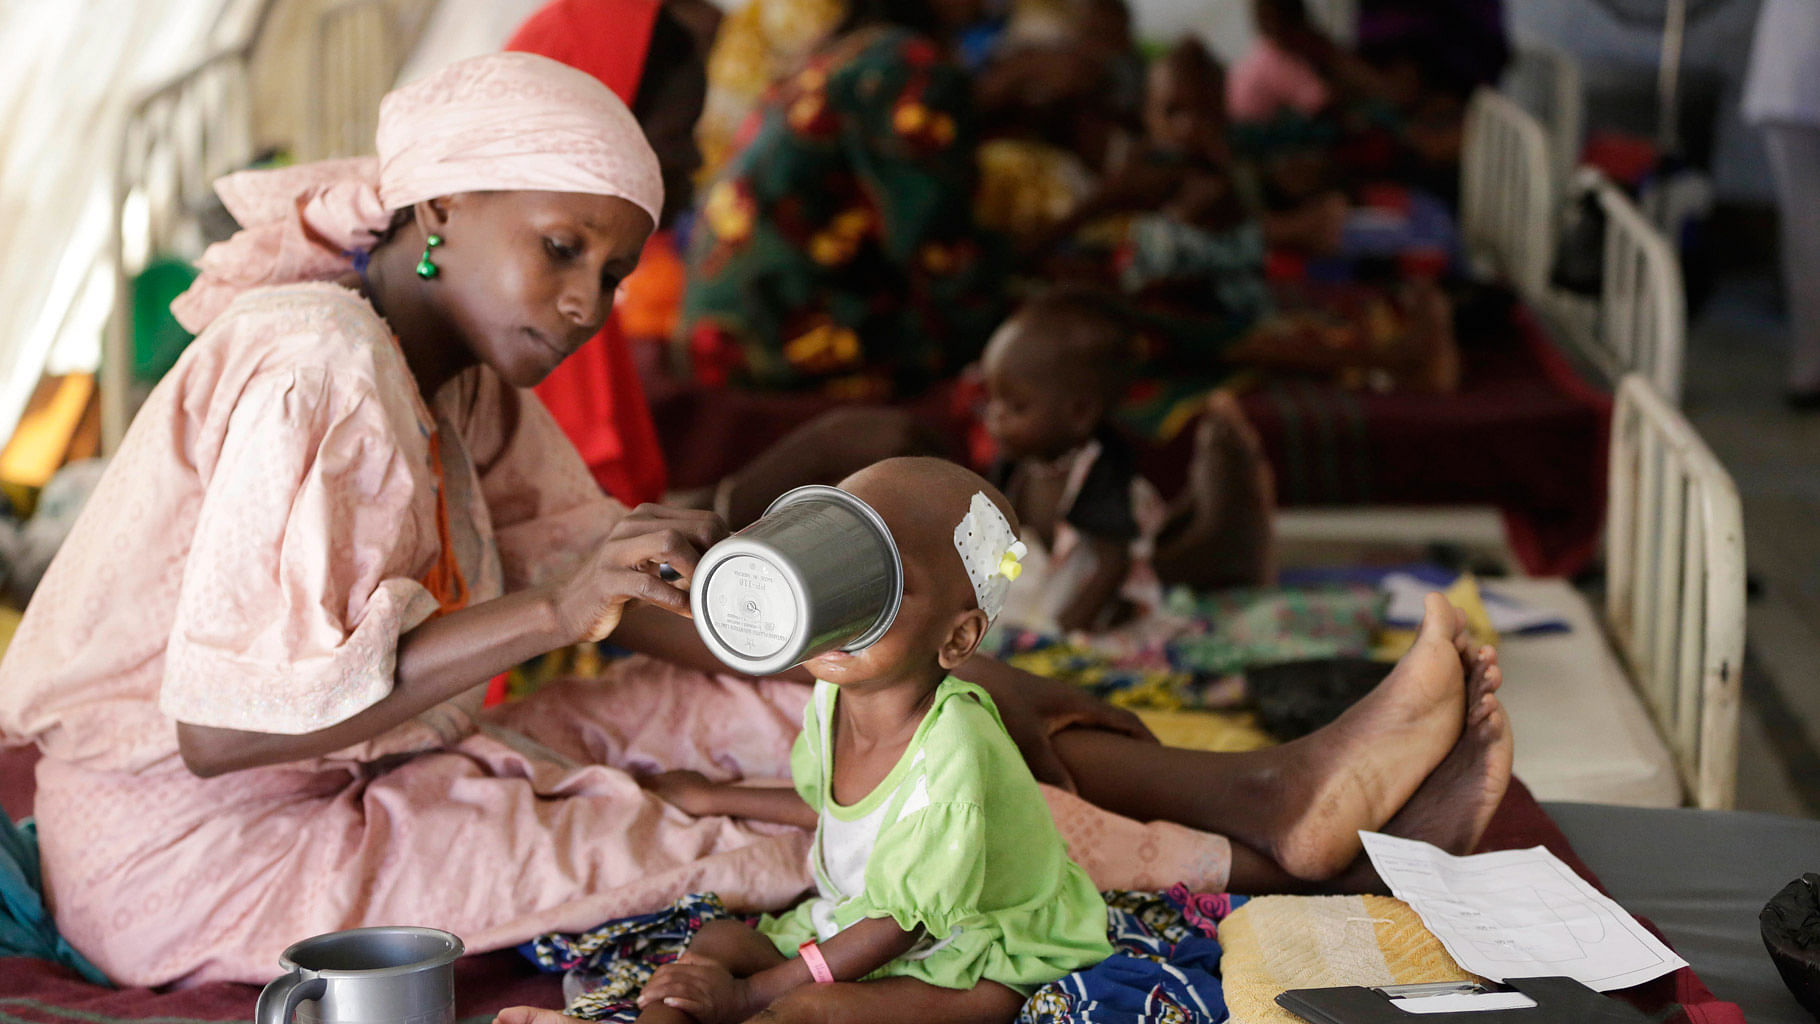 UN and food organisations define famine as when more than 30 percent of children under age 5 suffer from acute malnutrition and mortality rates are two or more deaths per 10,000 people everyday, among other criteria. (Photo: AP) 